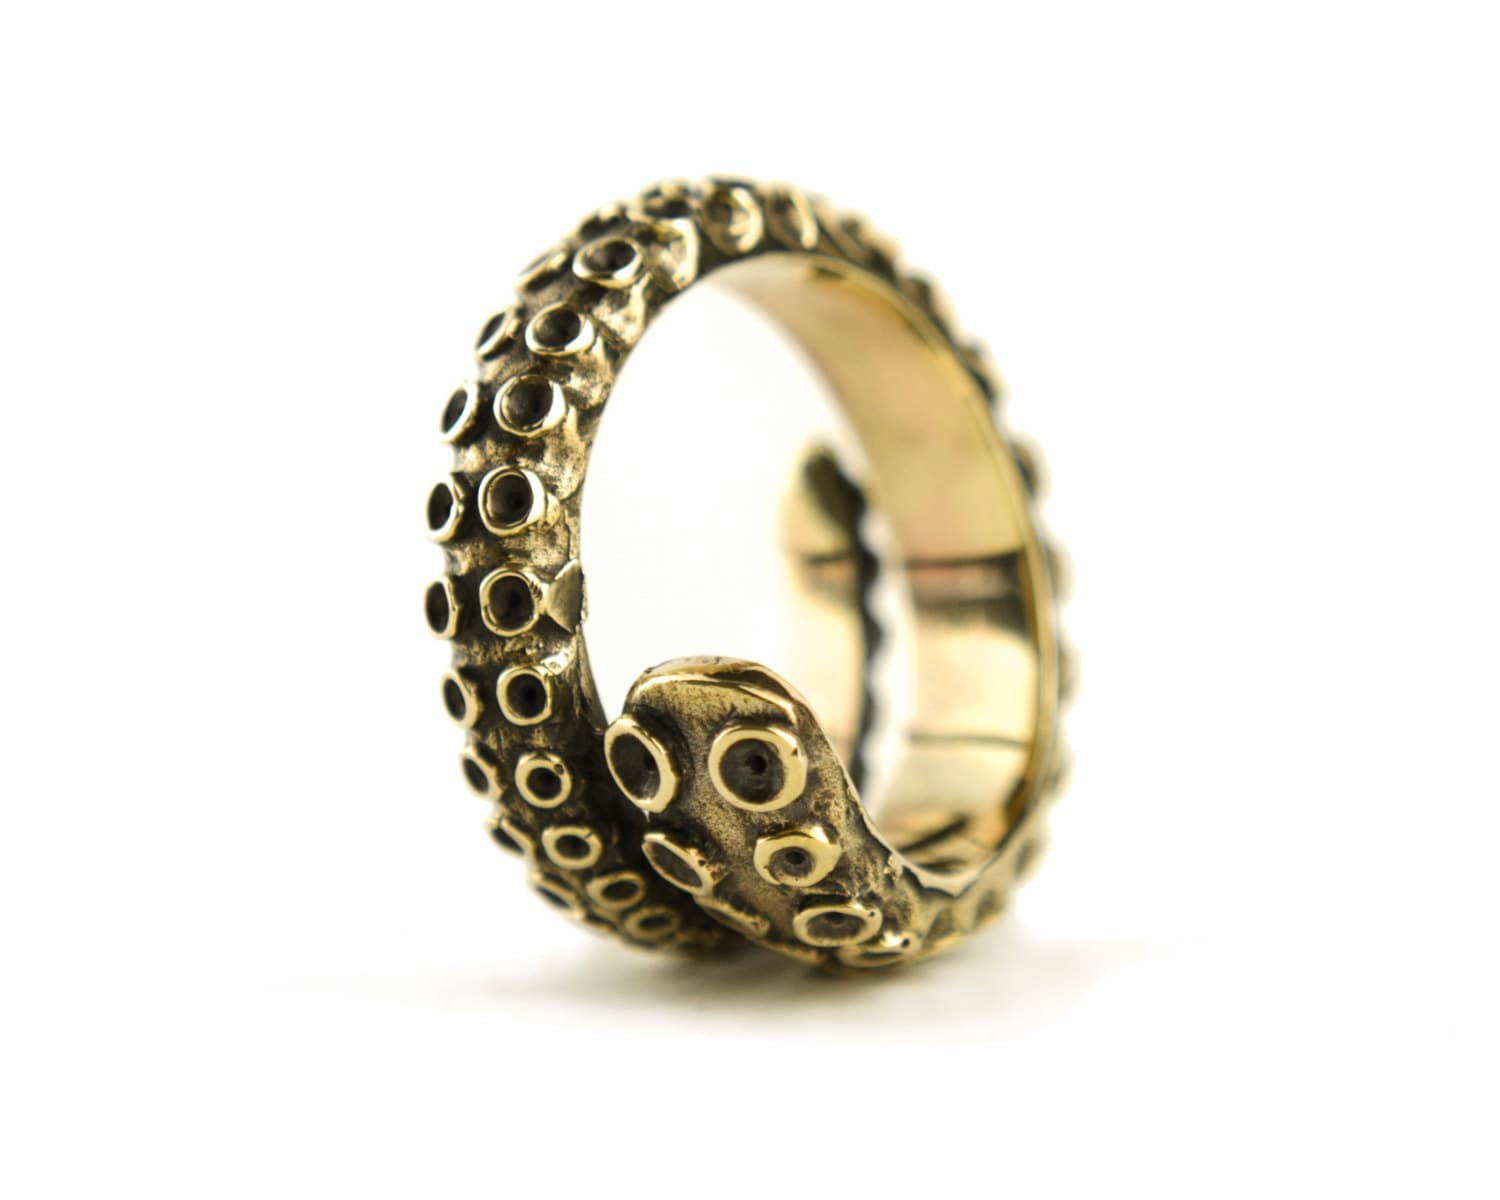 Octopus Tentacle Ring Golden Color Adjustable Ring Wrap Ring Boho Steampunk Jewelry - FRI005YB